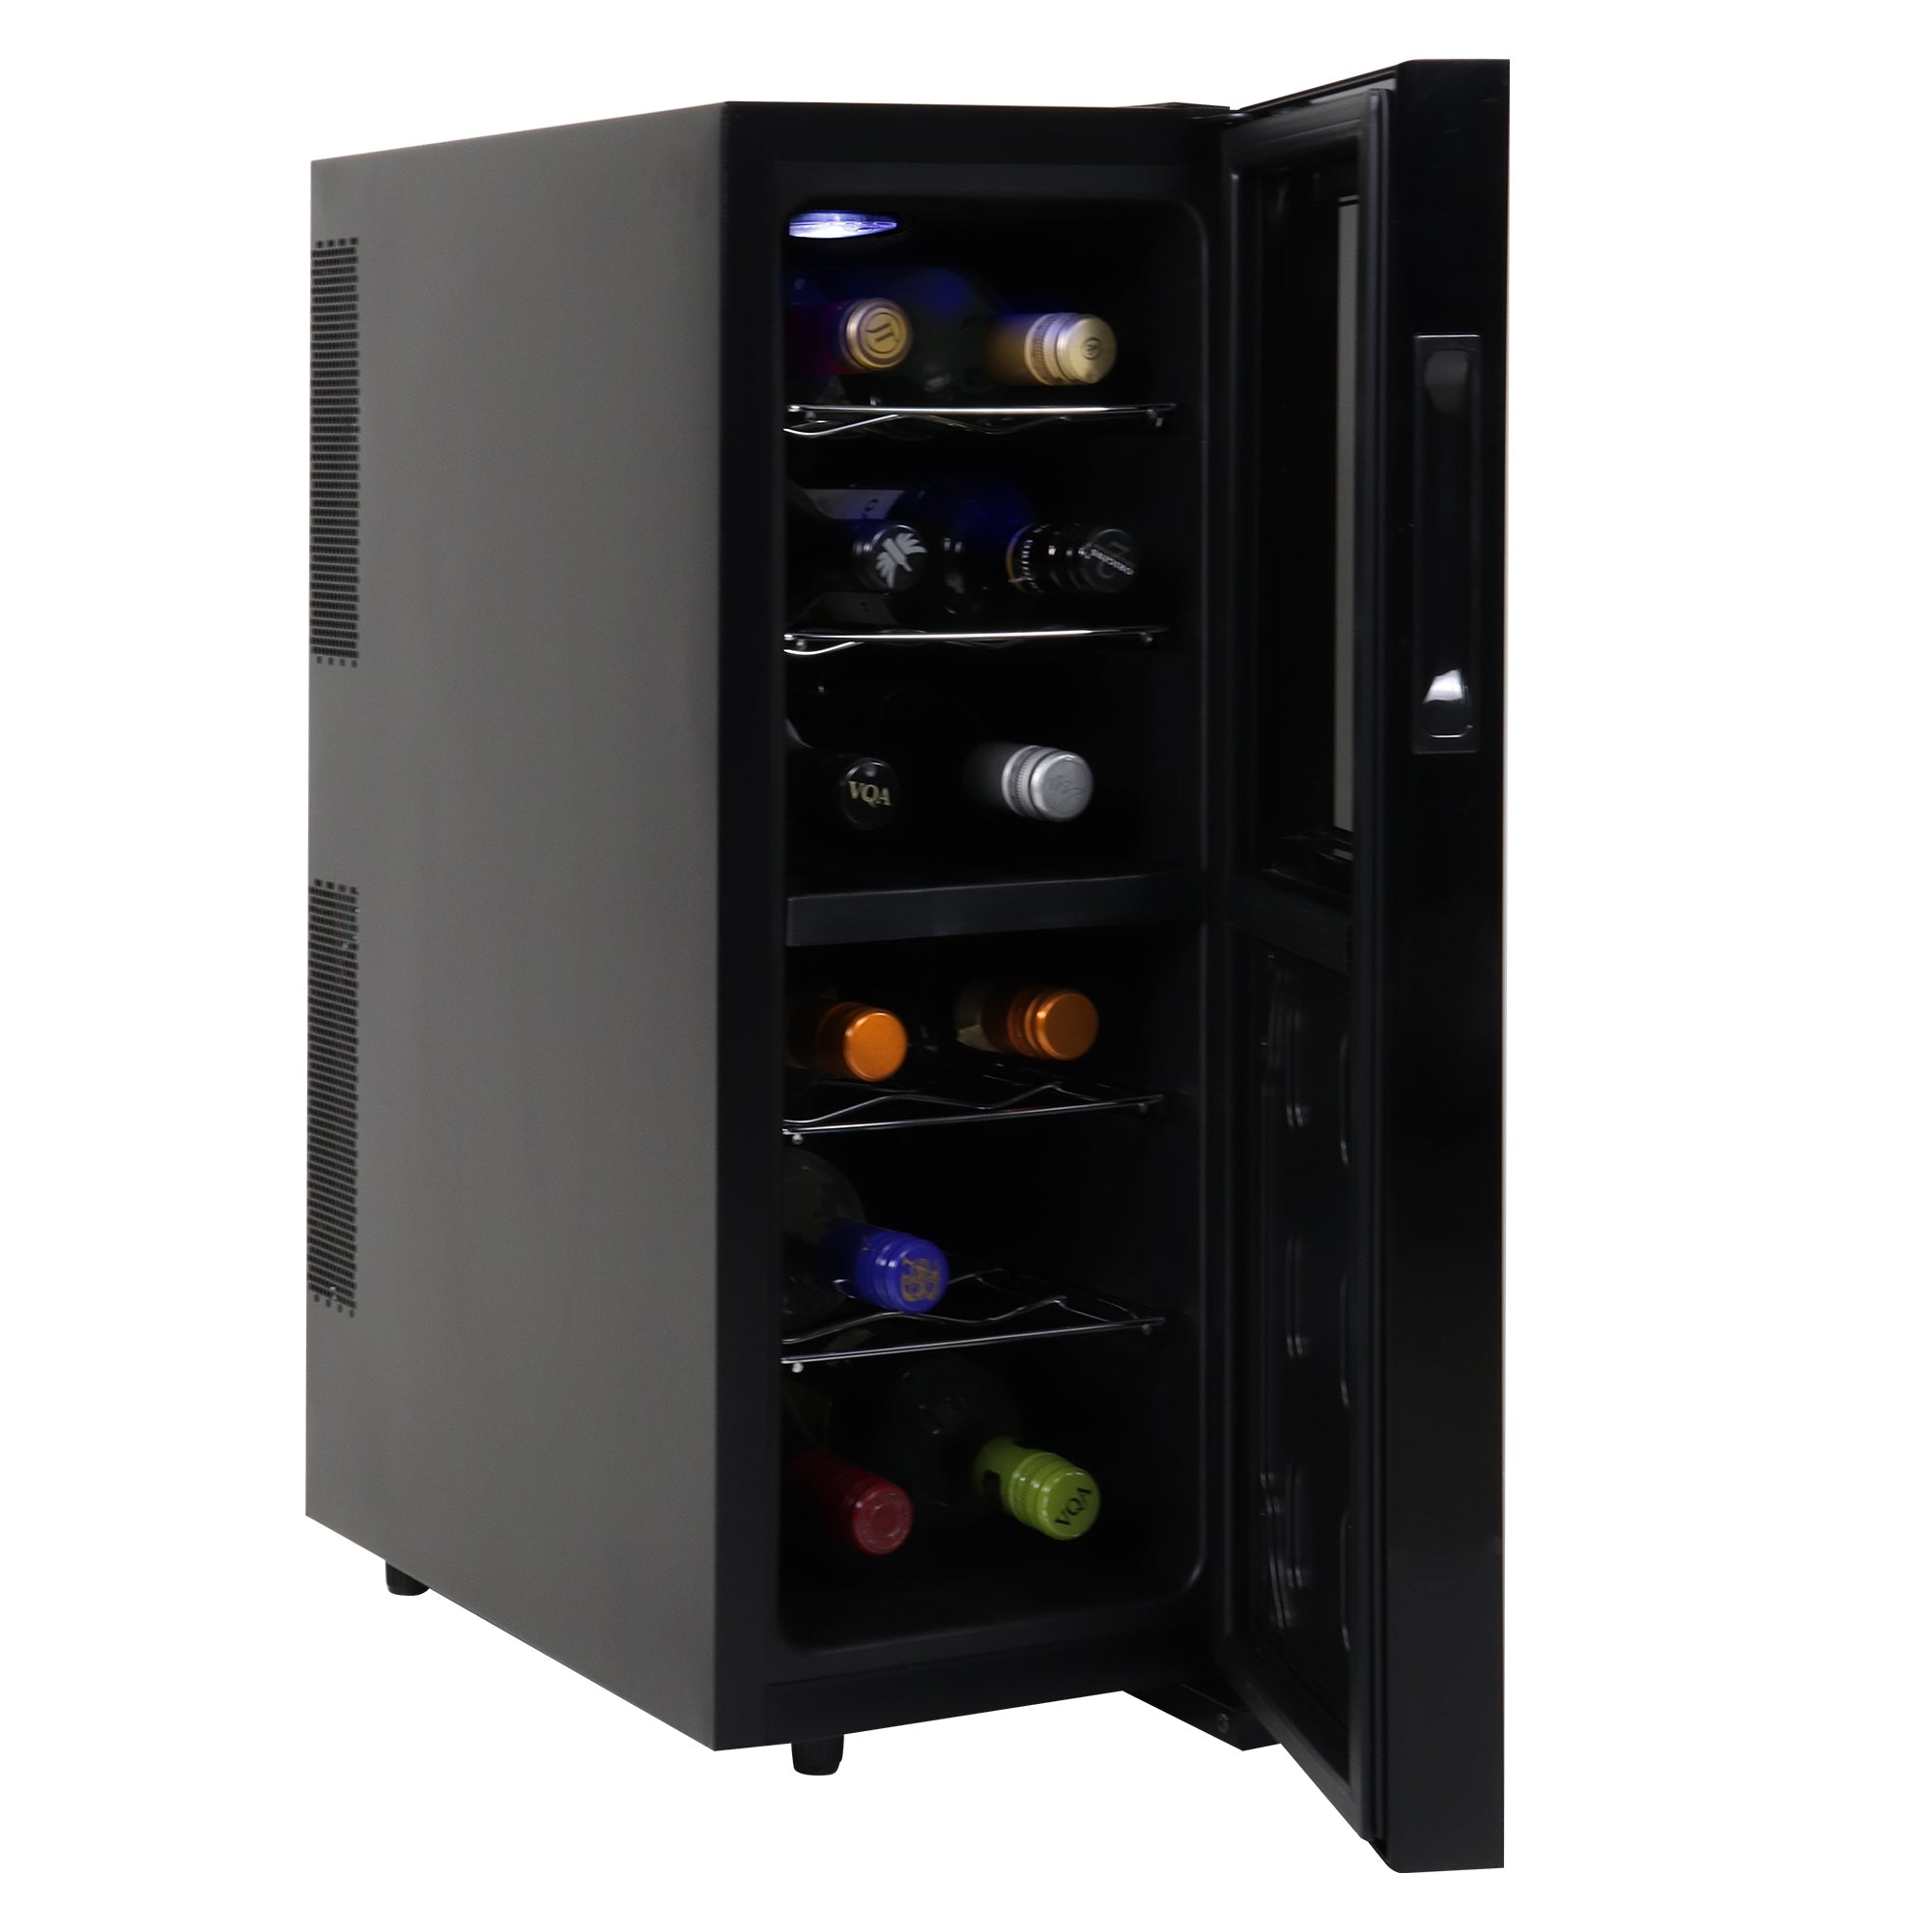 Koolatron 12 bottle dual zone wine cooler, open with bottles of wine inside, on a white background